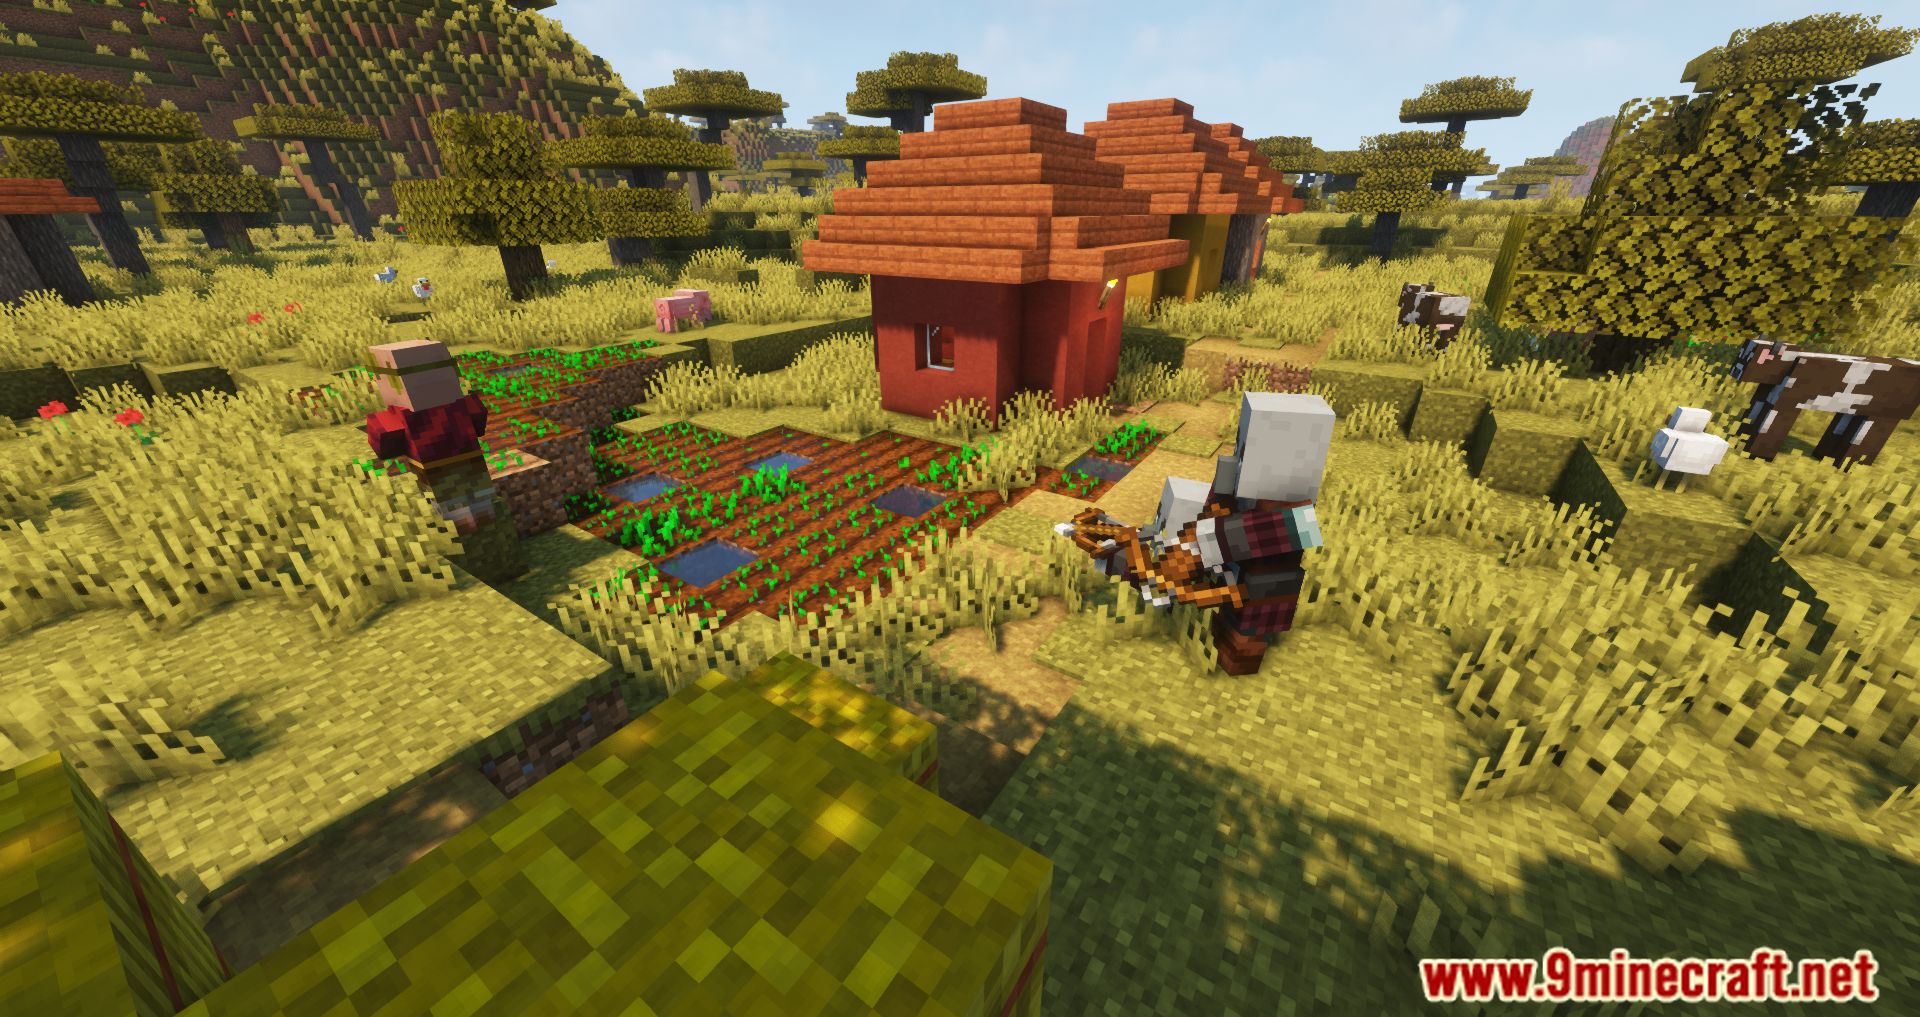 Pillagers Mod (1.16.5, 1.12.2) - Allows You To Get Villager Loot By Killing Them! 5